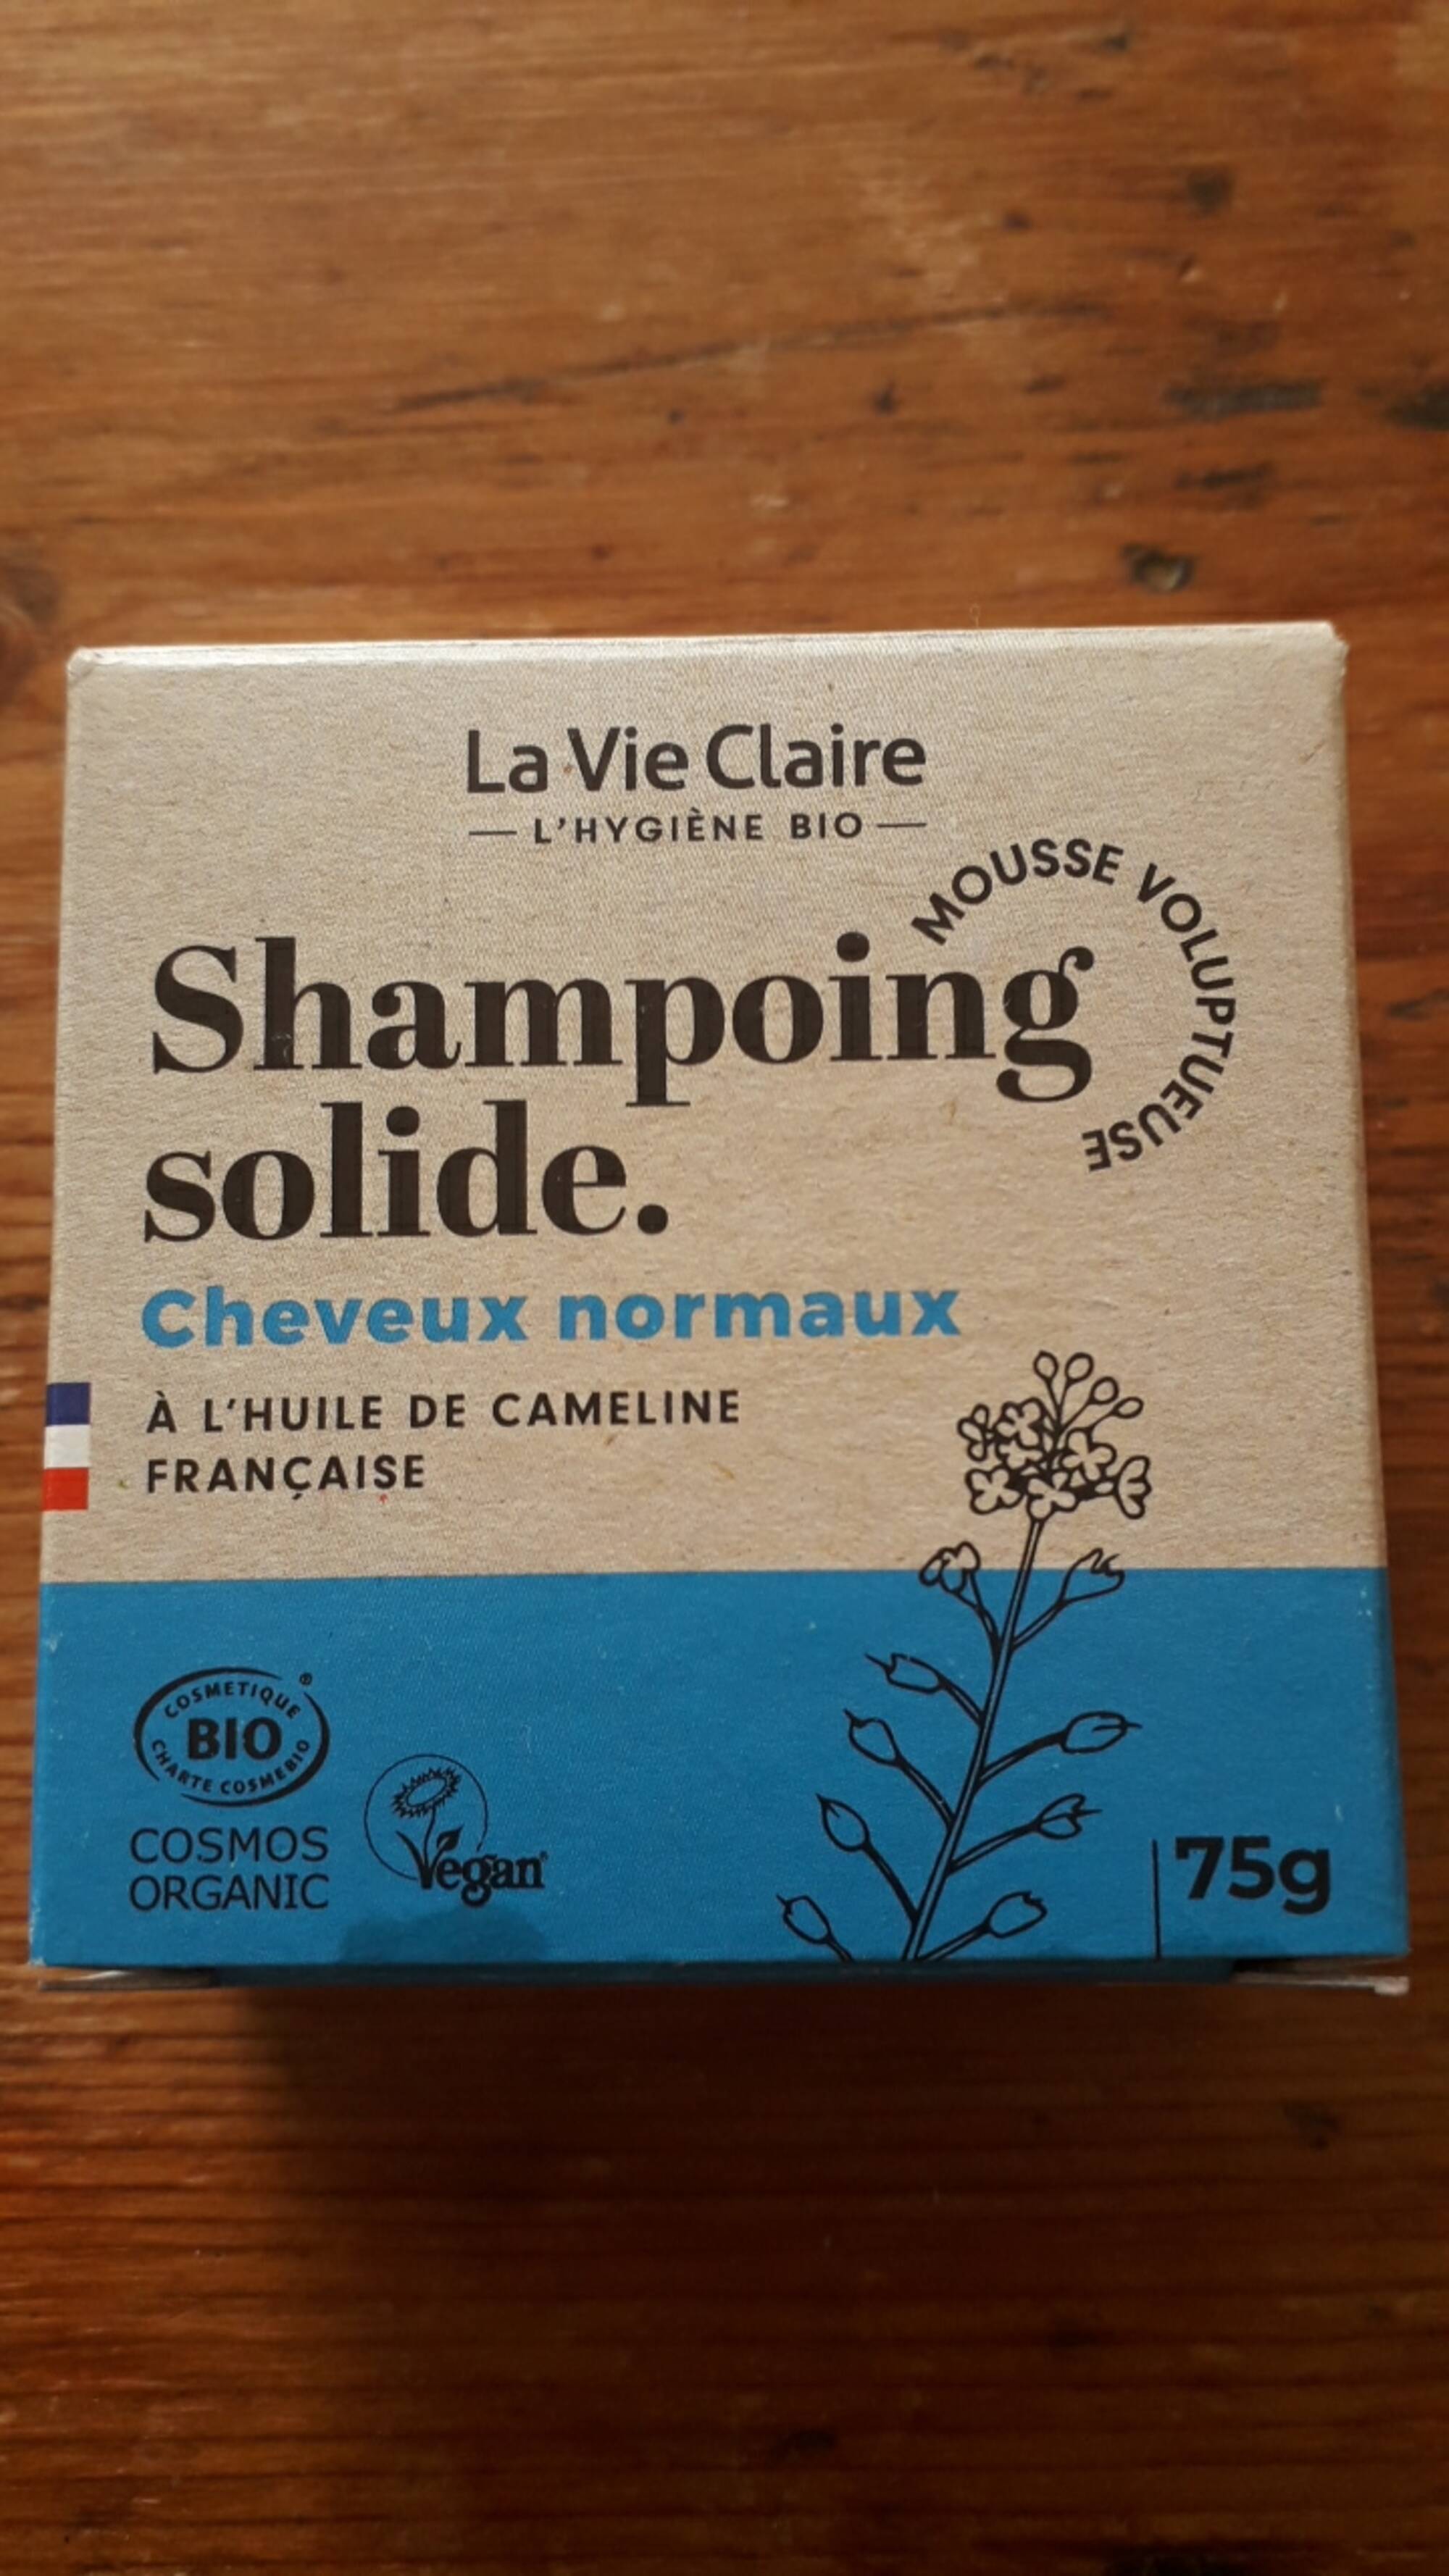 LA VIE CLAIRE - Shampoing solide - Cheveux normaux